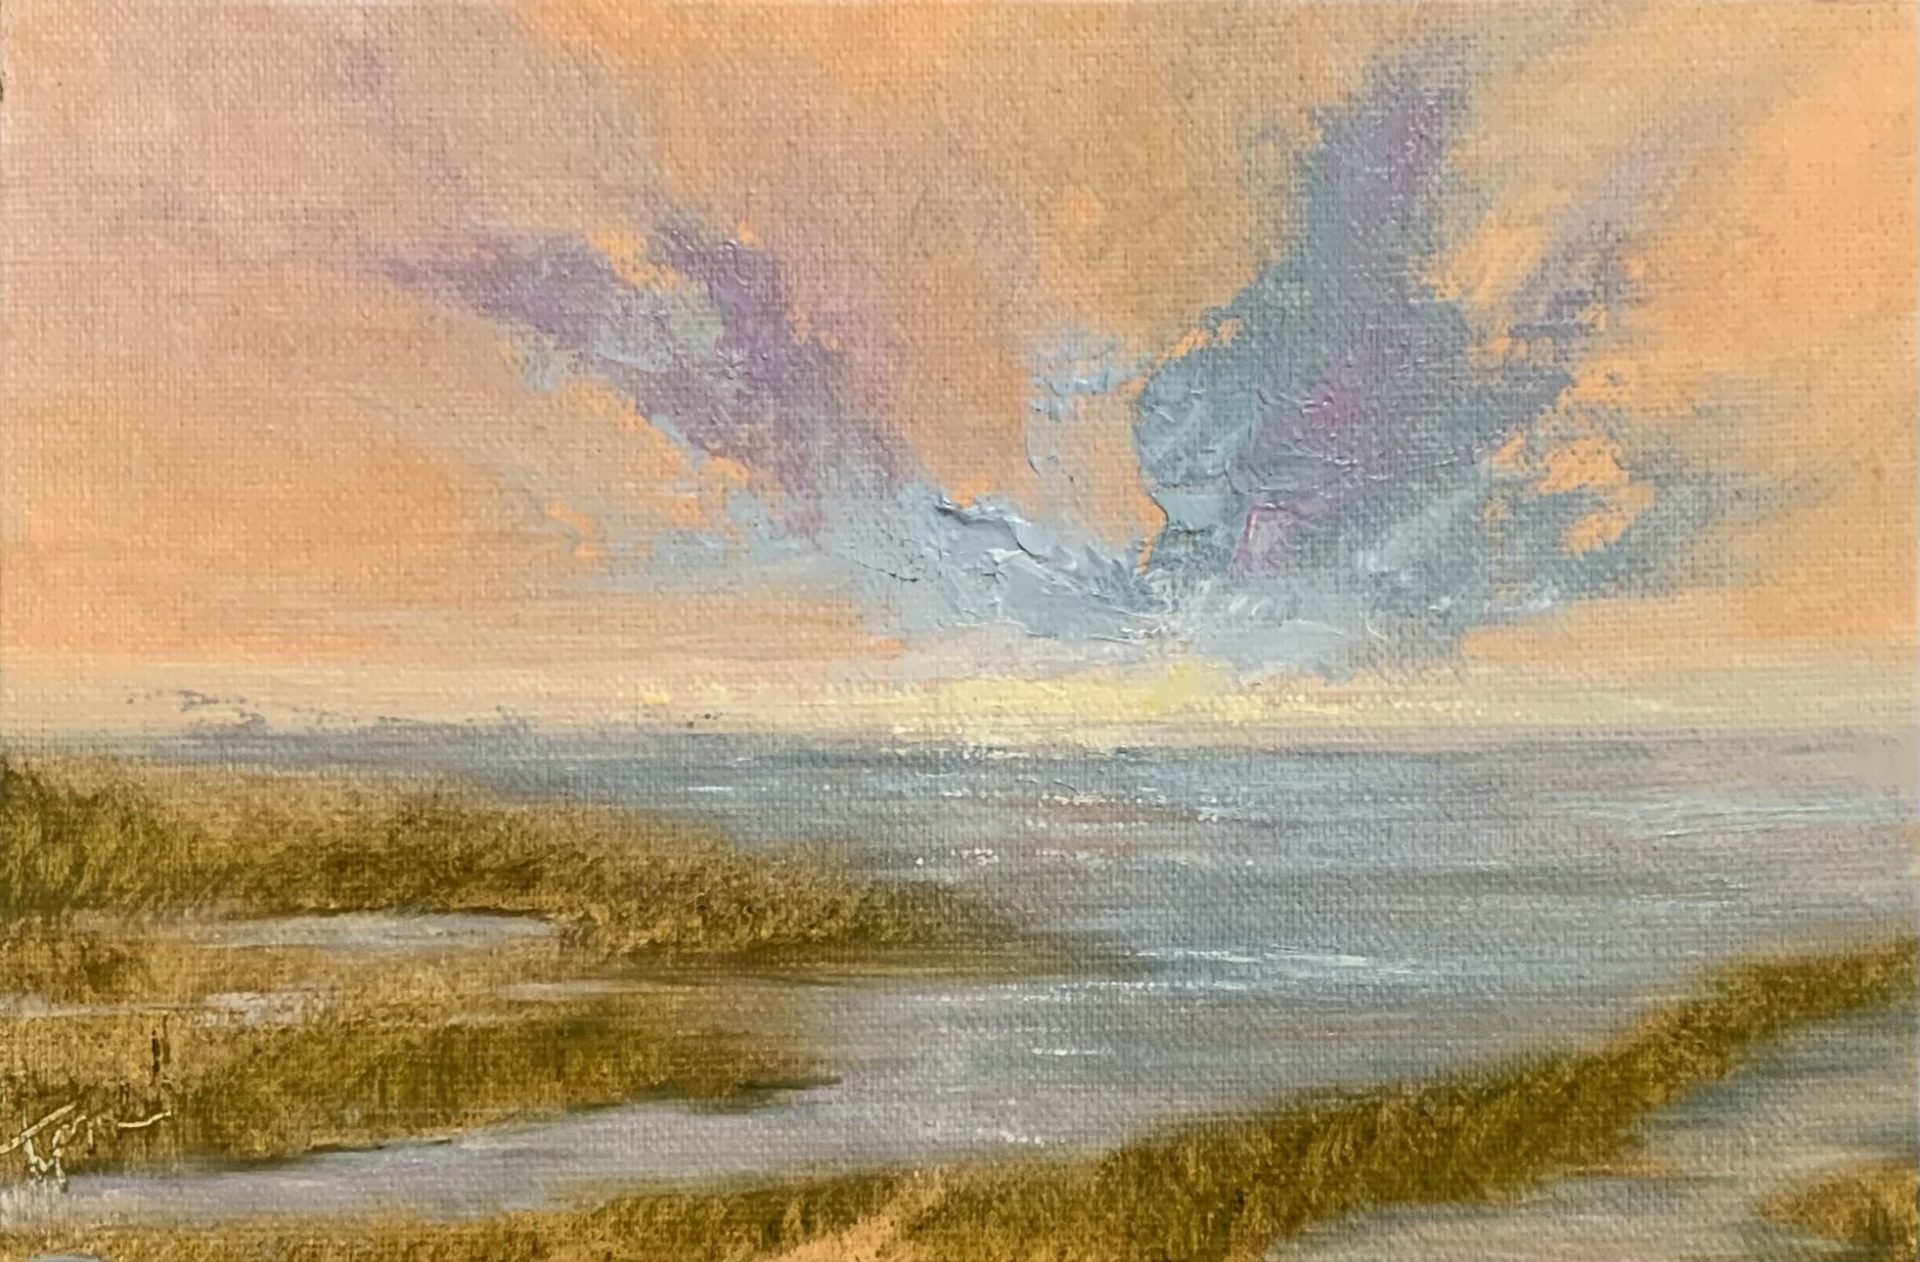 Original tiny oil painting by Tisha Mark, Week 30, 52 Weeks of Finding Light Series, 4"x6" oil on linen panel (2023). This tiny seascape features an orange-toned sunrise sky with blue and lavender cloud formations.